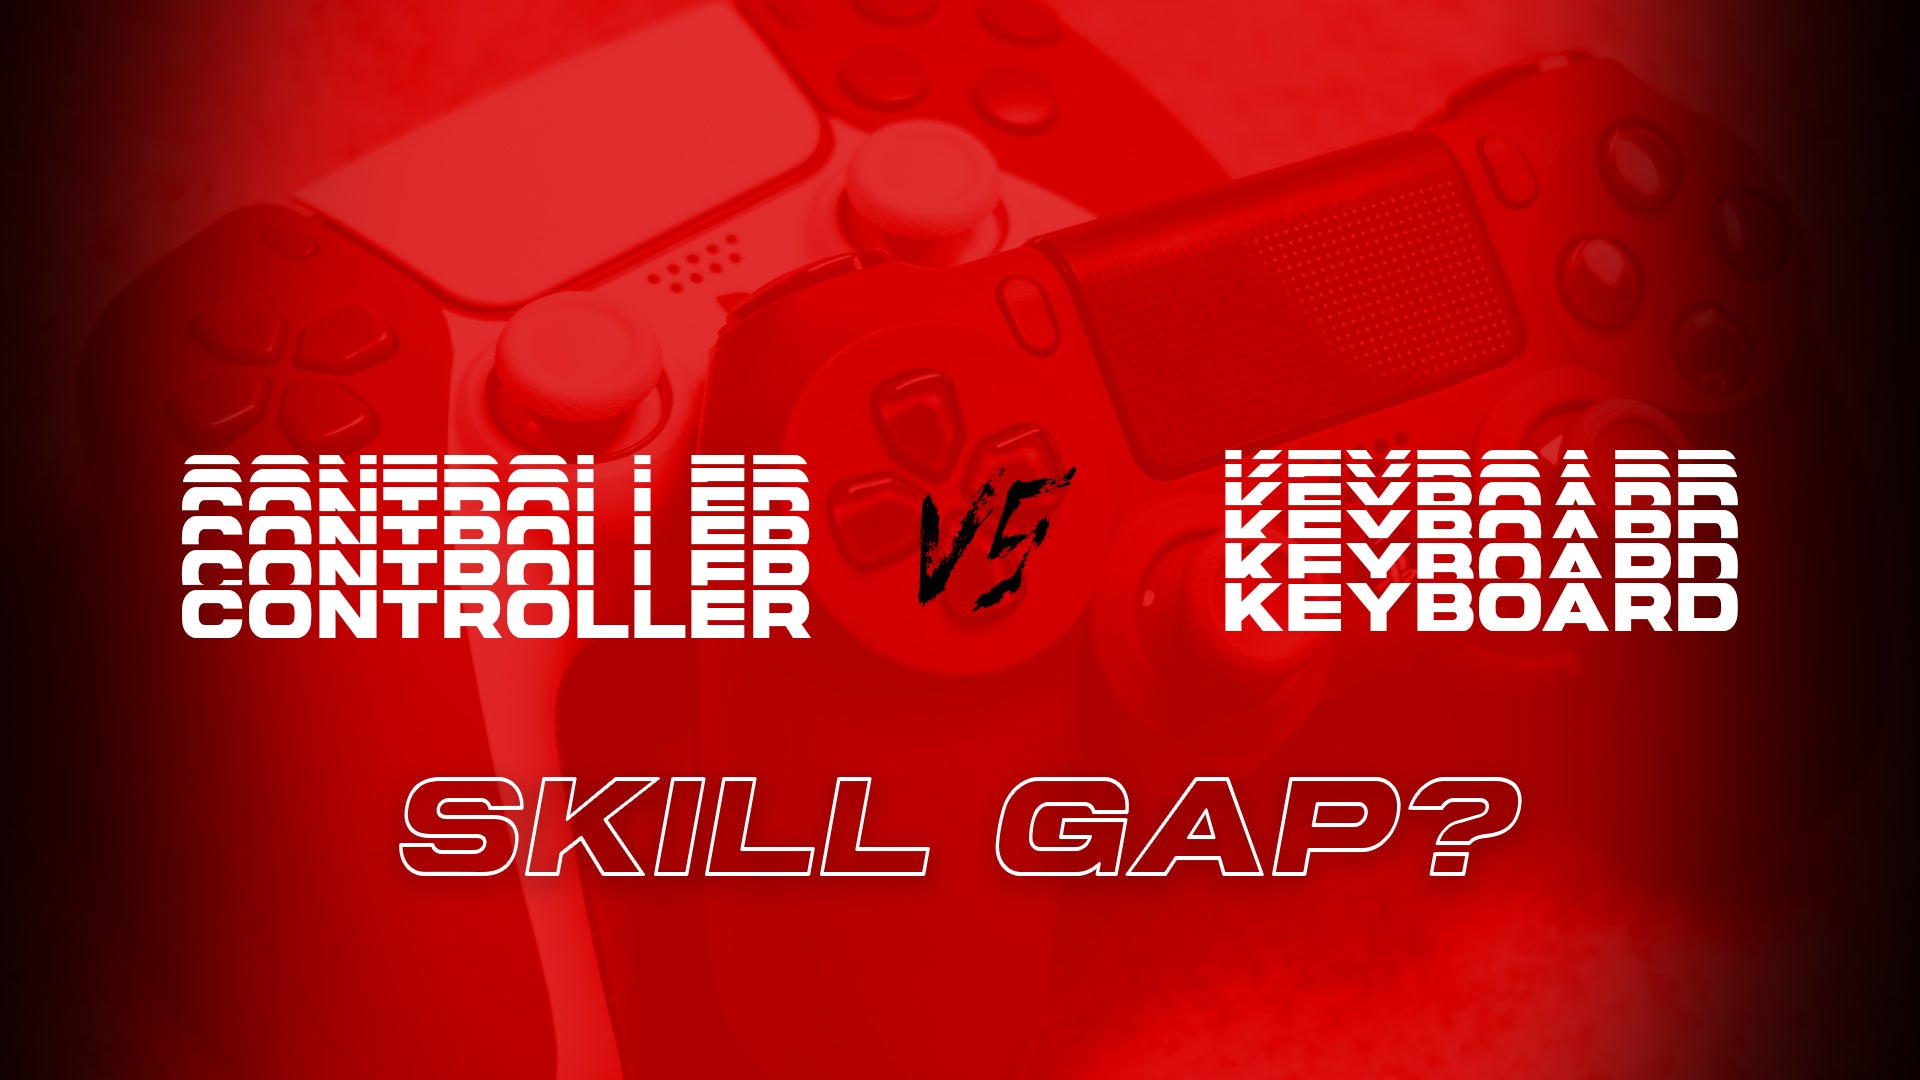 Controller vs Mouse and Keyboard Skill Gap